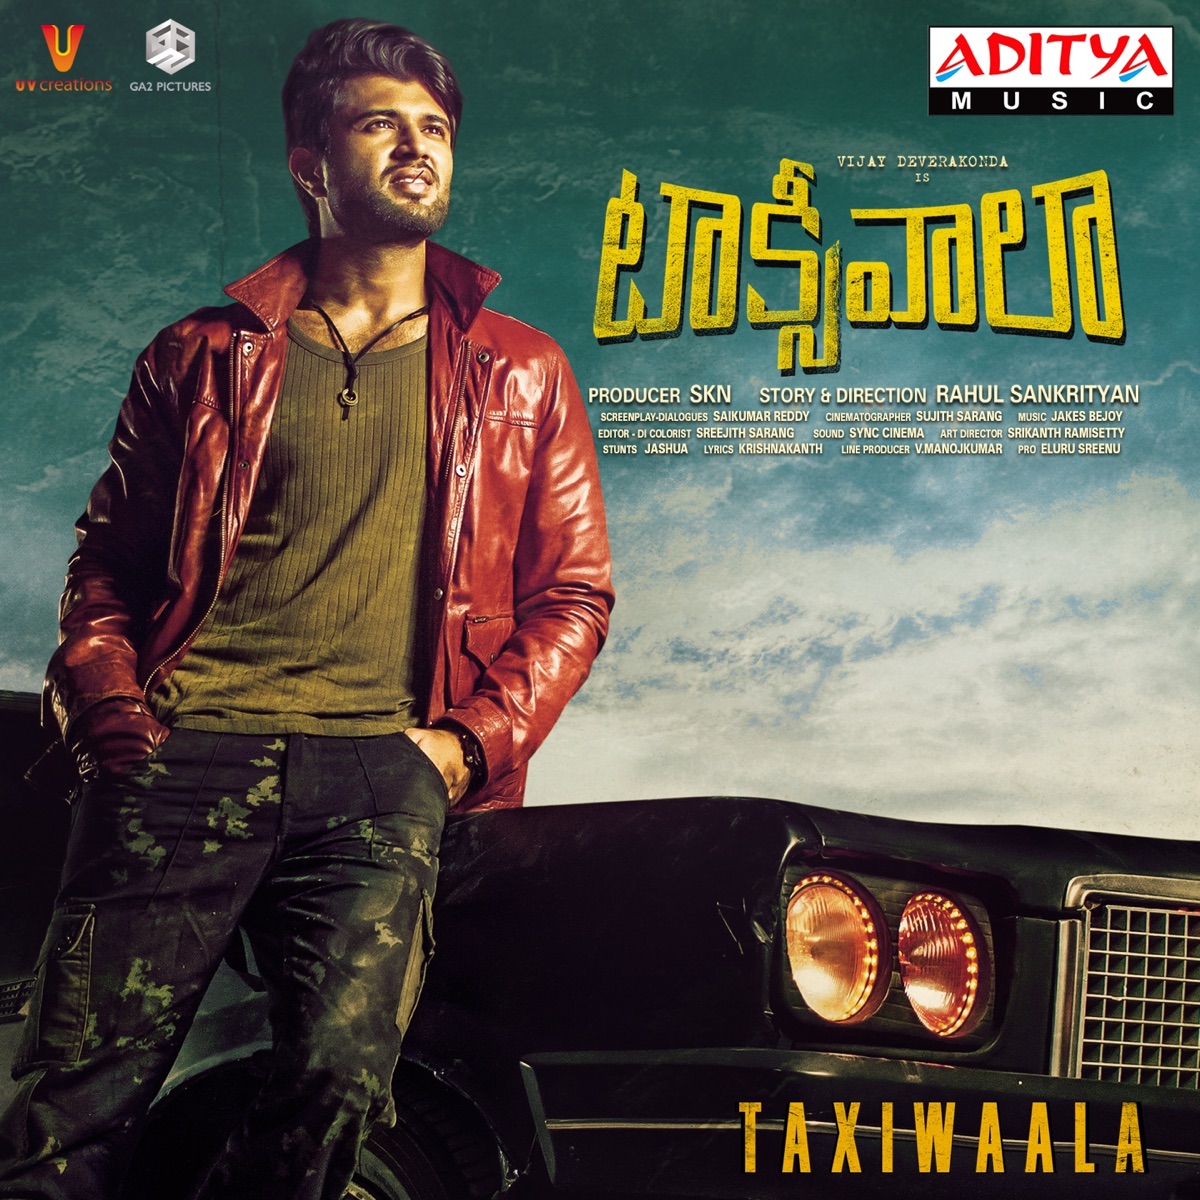 Taxiwaala (Original Motion Picture Soundtrack) by Jakes Bejoy on Apple Music